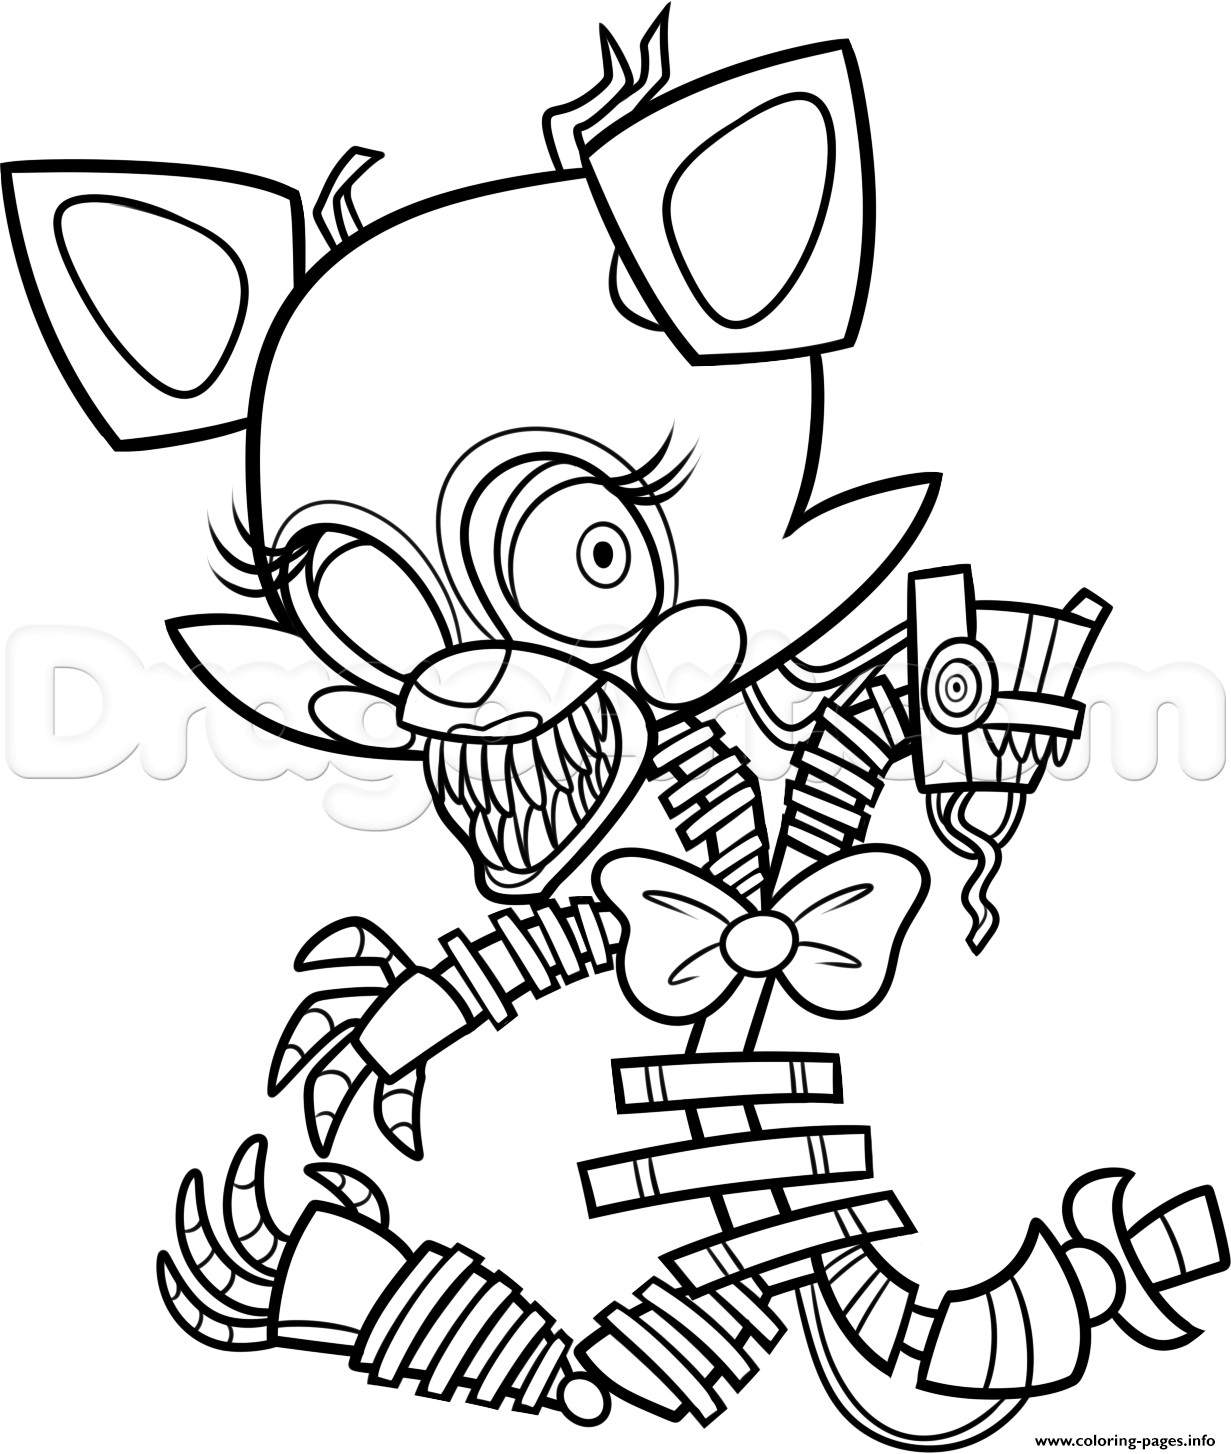 Five Nights At Freddy Coloring Pages
 Freddy S At Five Nights 2 Fnaf Coloring Pages Printable